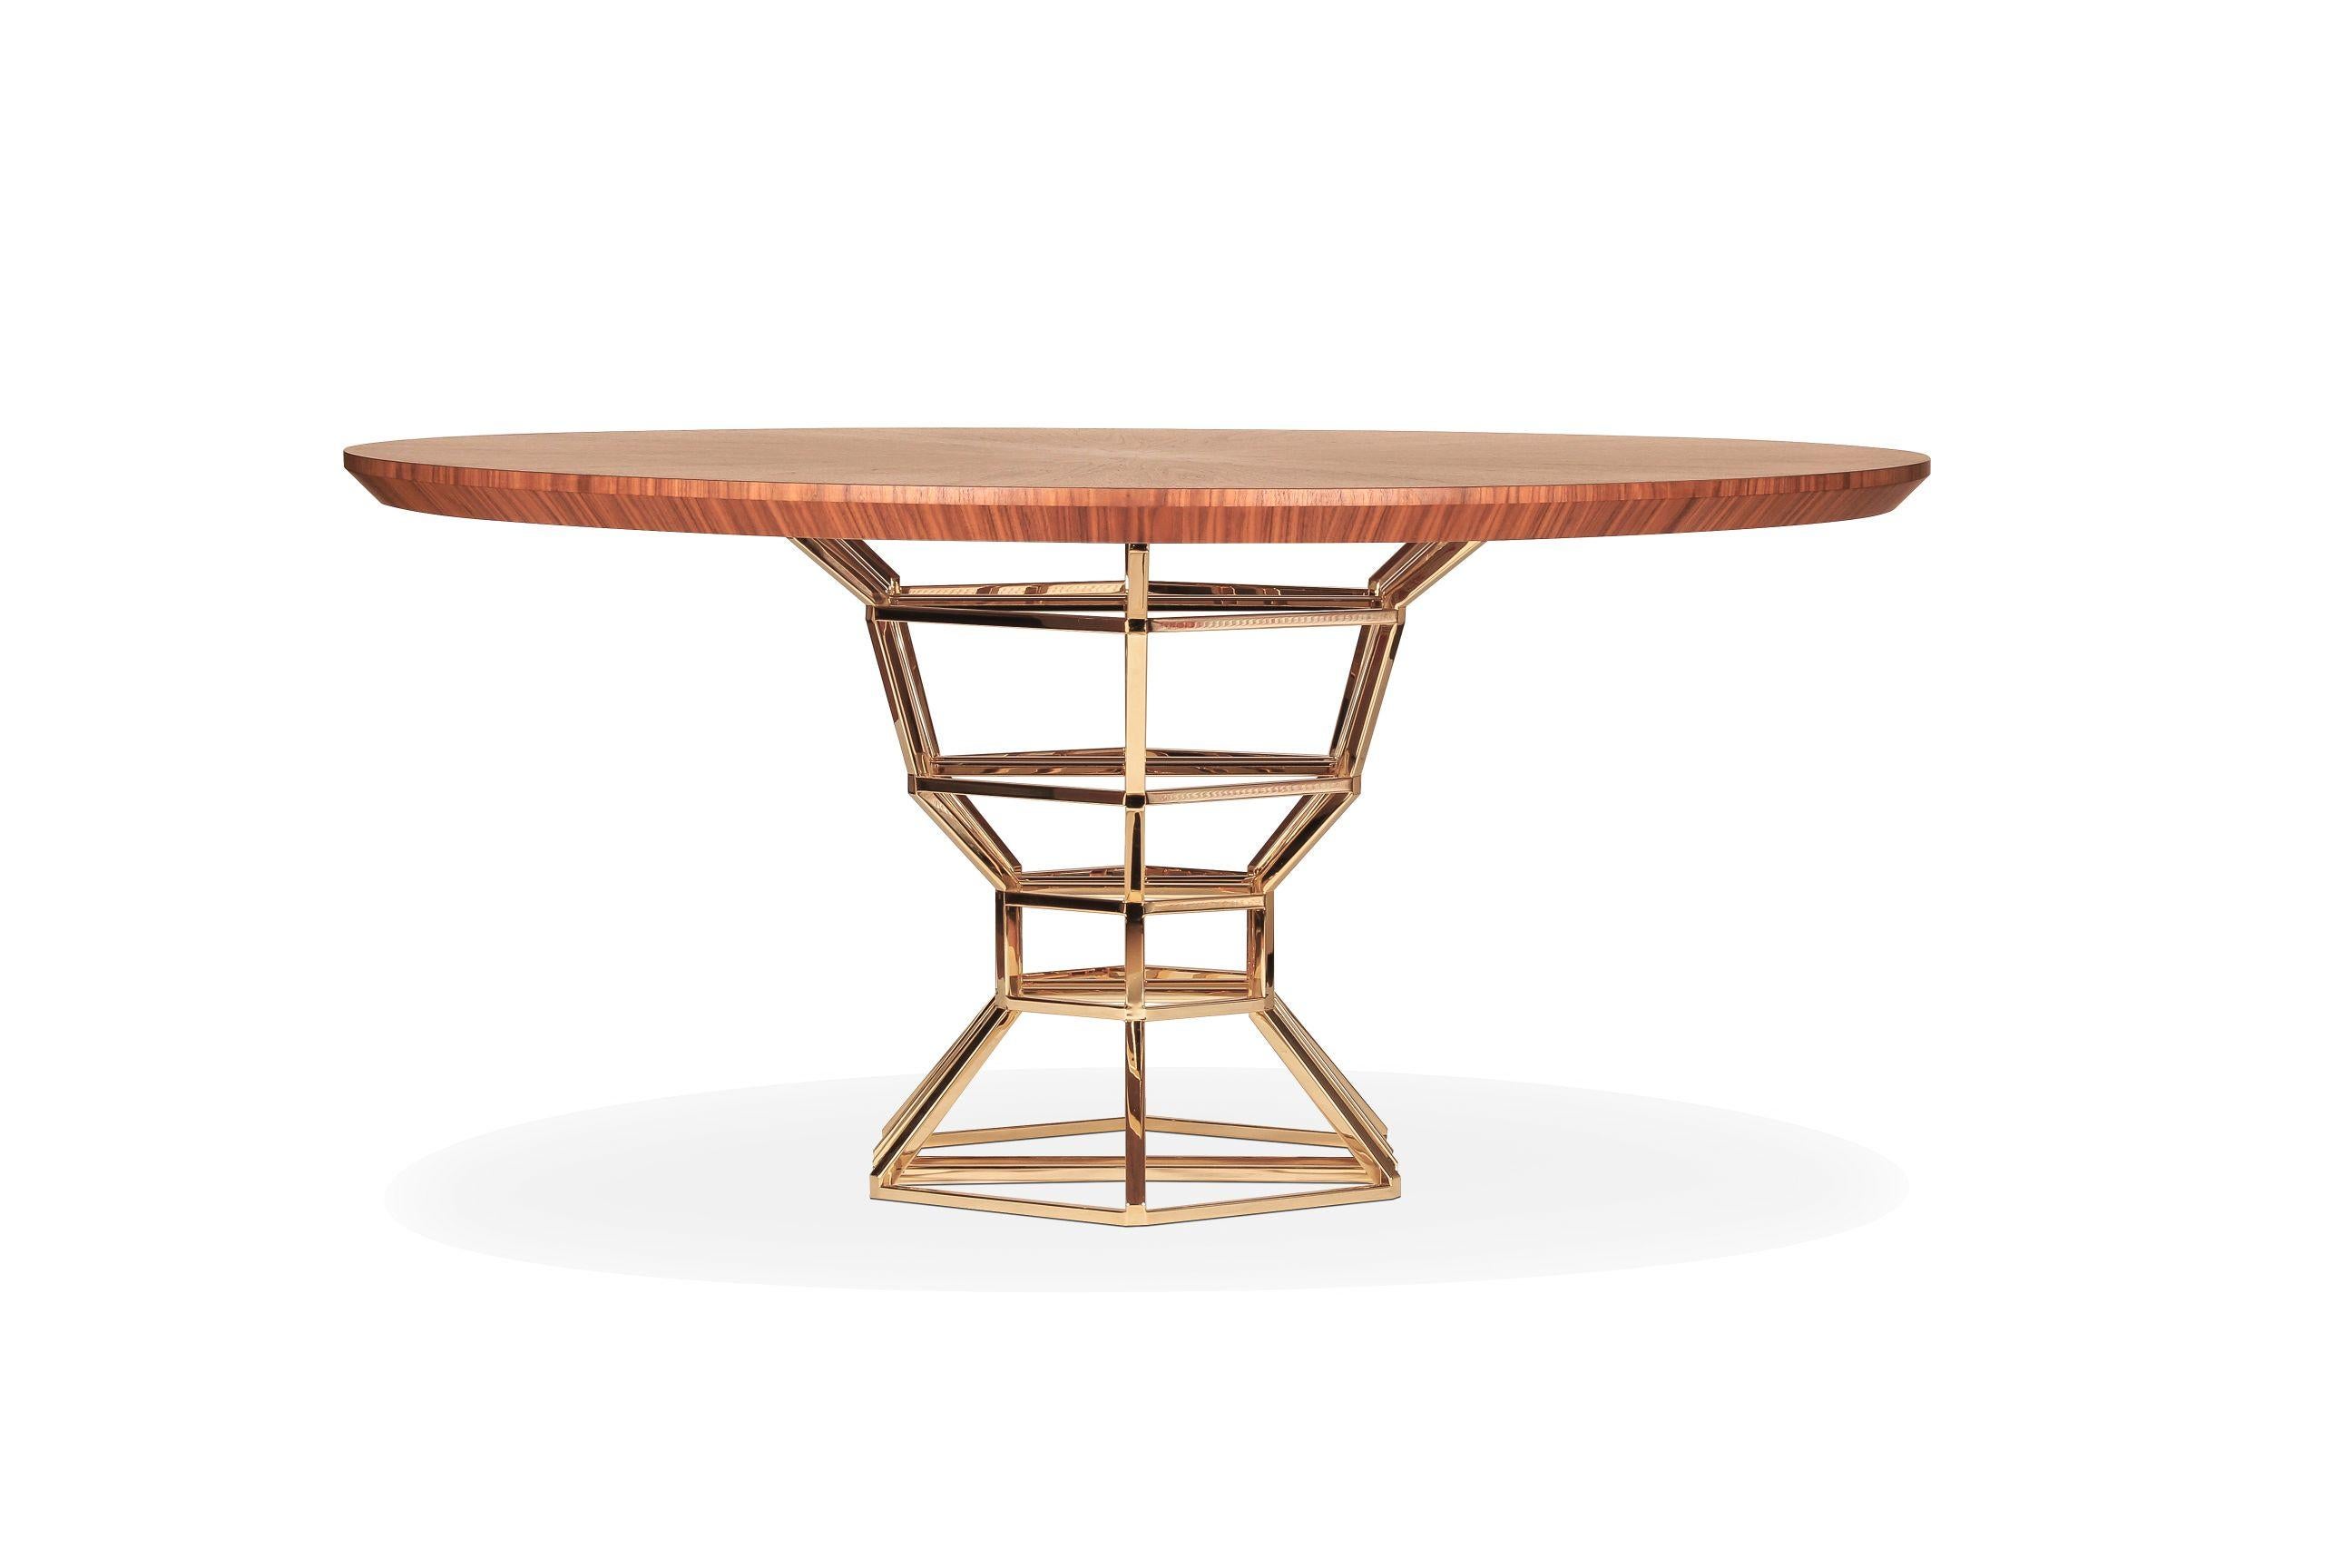 The Graal table by Royal Stranger
Dimensions: 160 x 160 x 75 cm
Materials: Walnut wood veneer inlay marquetry with matte finish and polished brass legs.

Based on a giant structural noble metal bowl, the base of the table worked in walnut wood